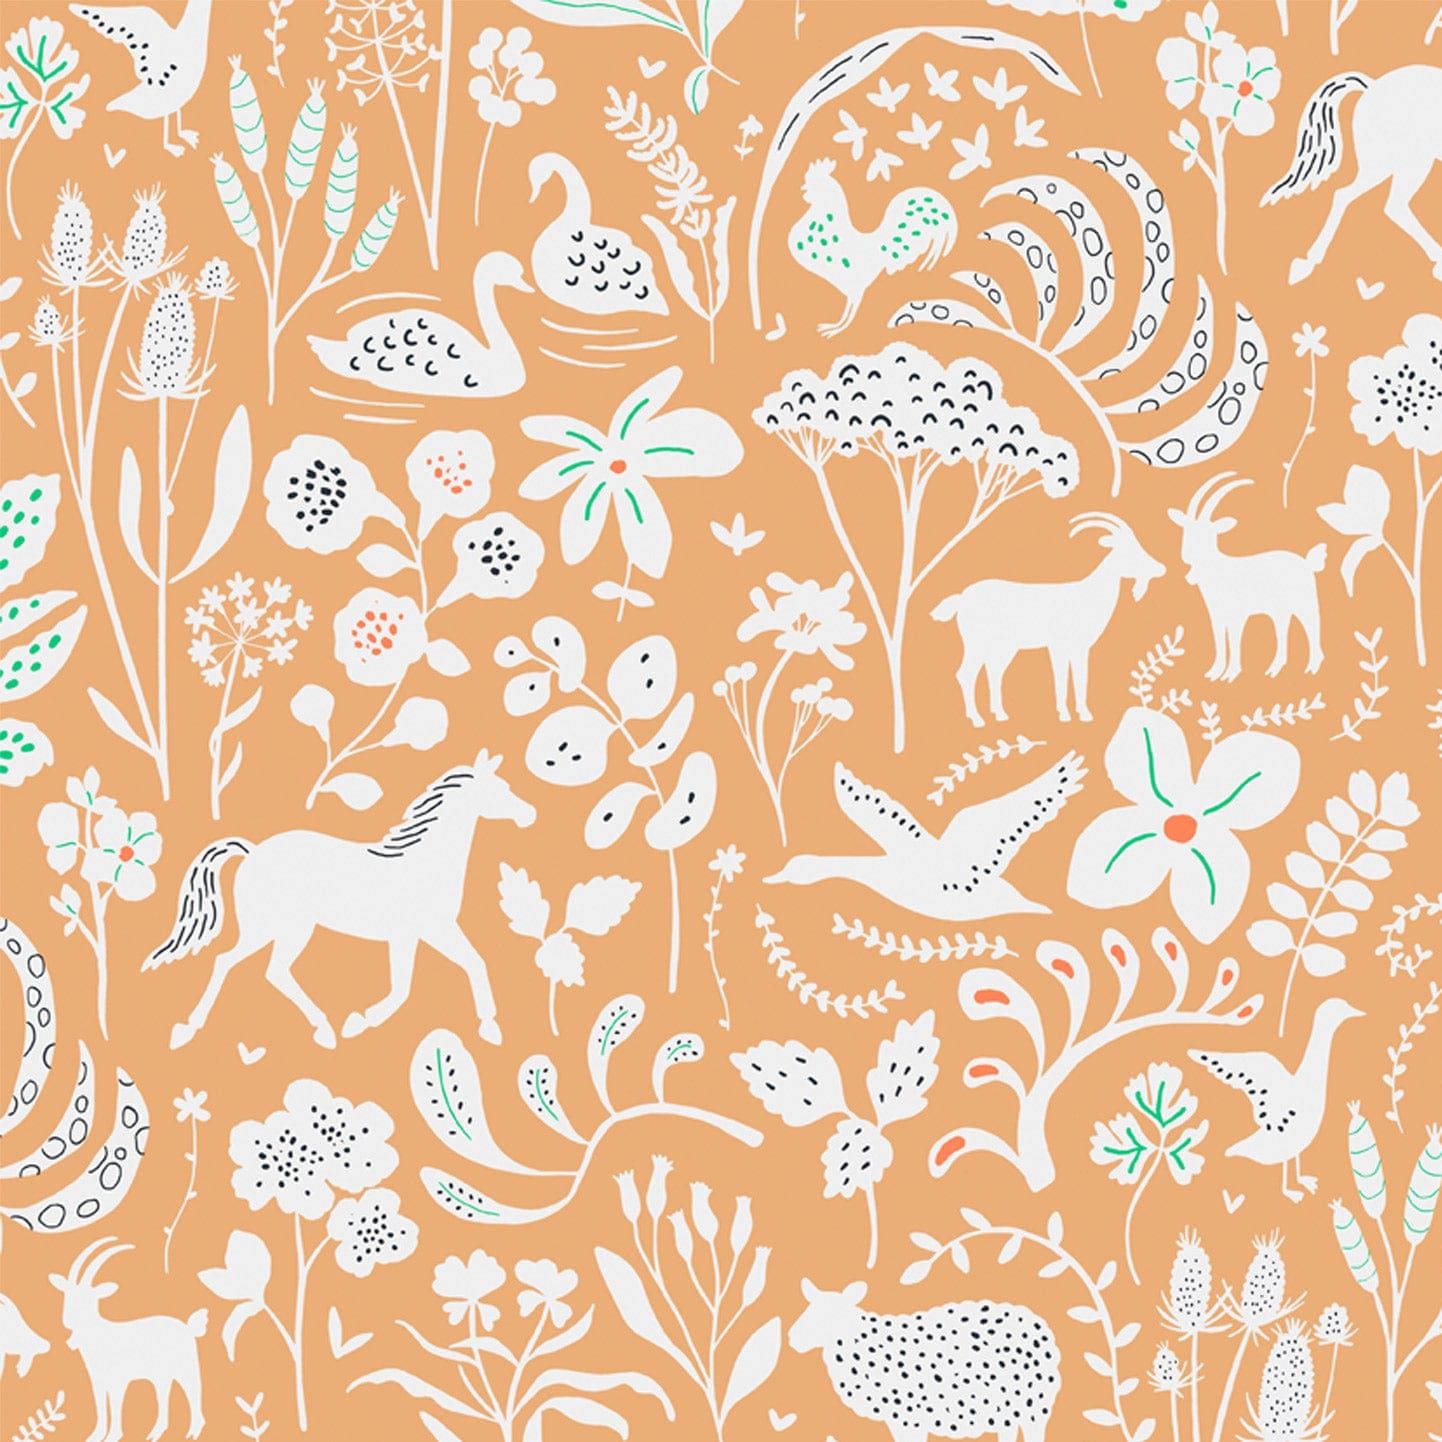 Wallpaper sample of white coloured flowers, leaves, swans, chickens, deers, ducks with a Ochre orange background.